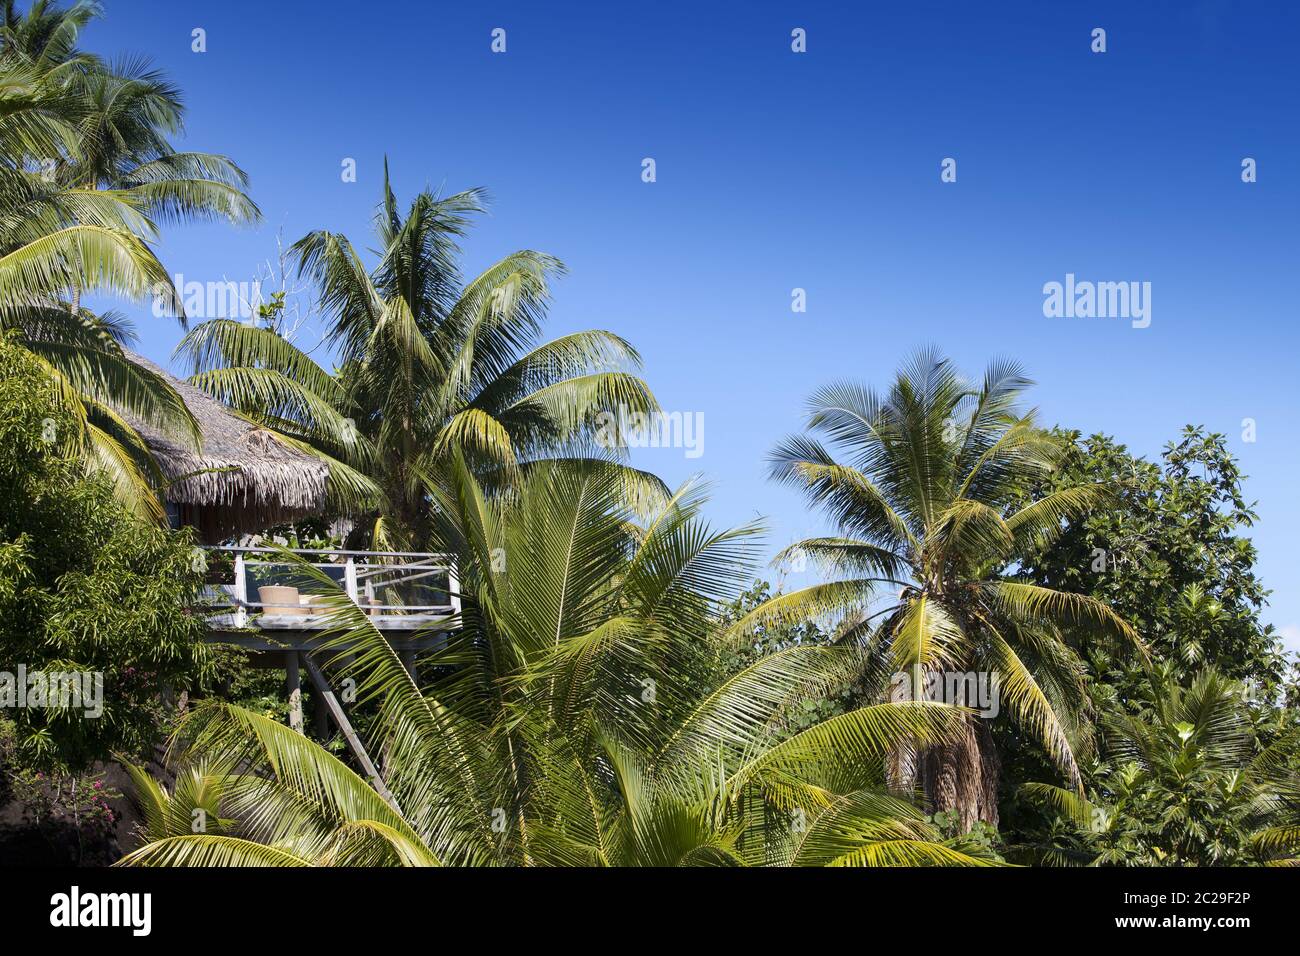 Tropical hut surrounded by palm trees Stock Photo